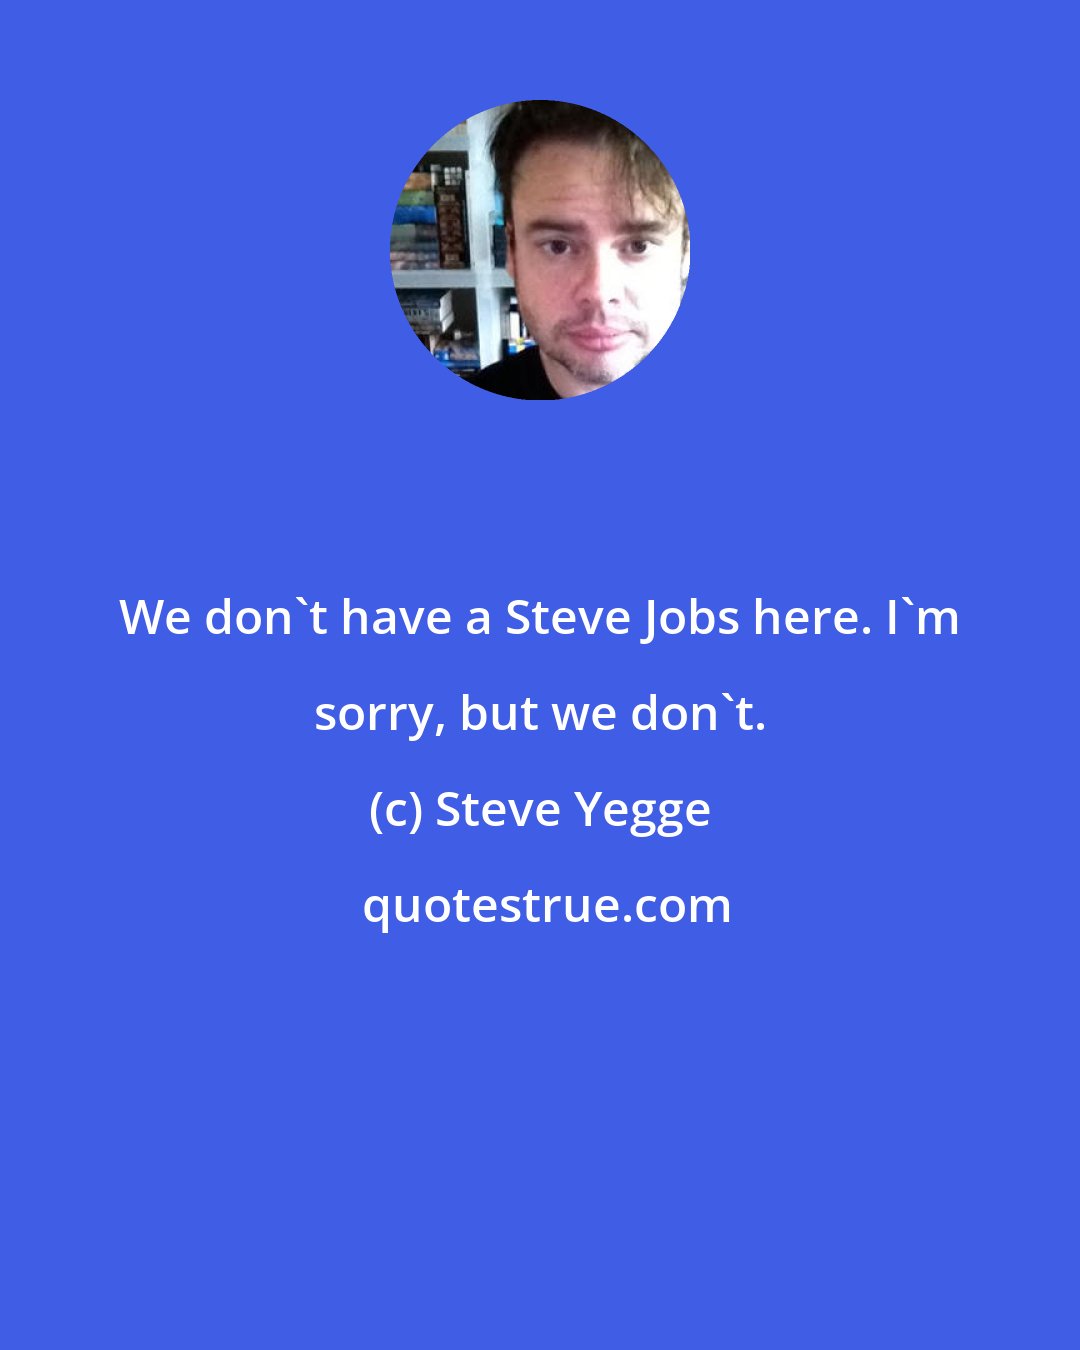 Steve Yegge: We don't have a Steve Jobs here. I'm sorry, but we don't.